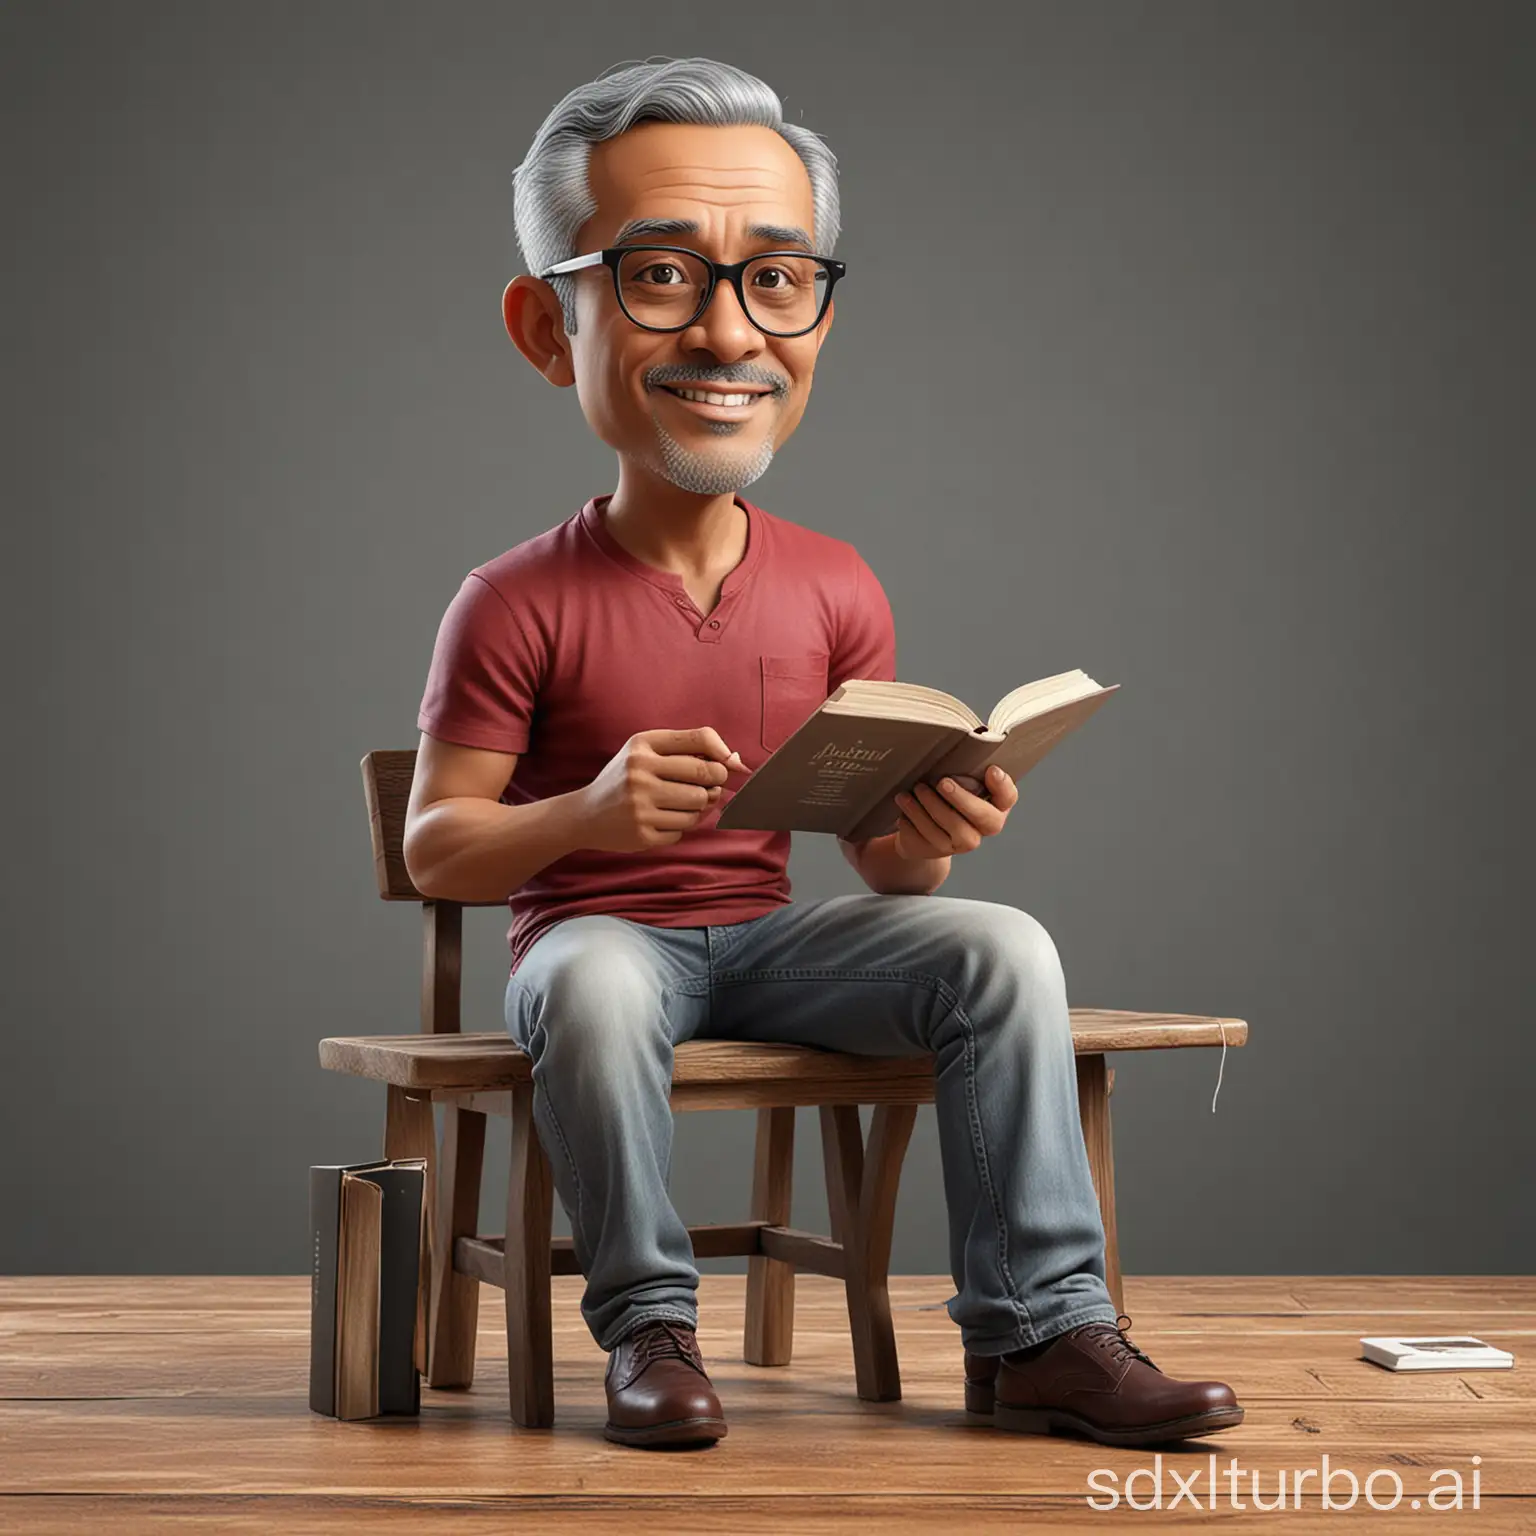 Realistic-3D-Caricature-Portrait-of-a-Relaxed-Indonesian-Man-in-Chair-with-Akal-Sehat-Tshirt-and-Glasses